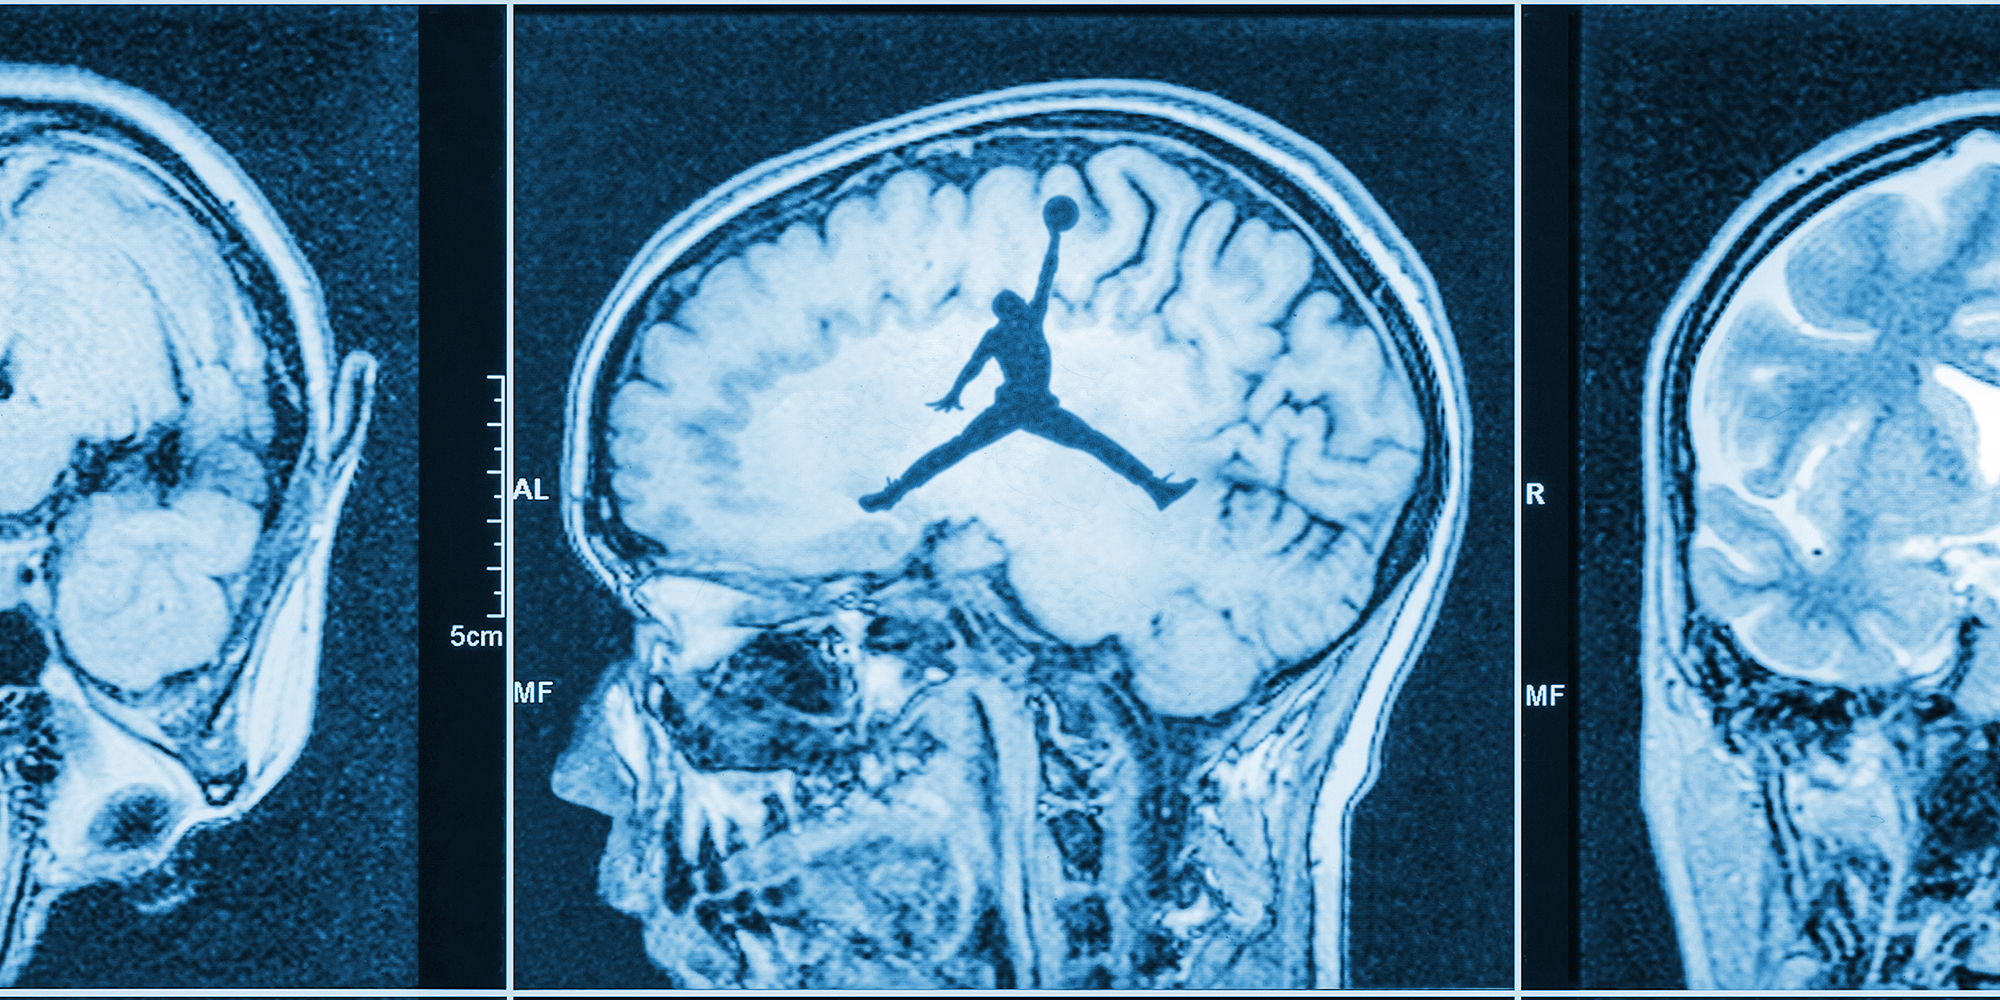 Brain scan with Jumpman logo in the center